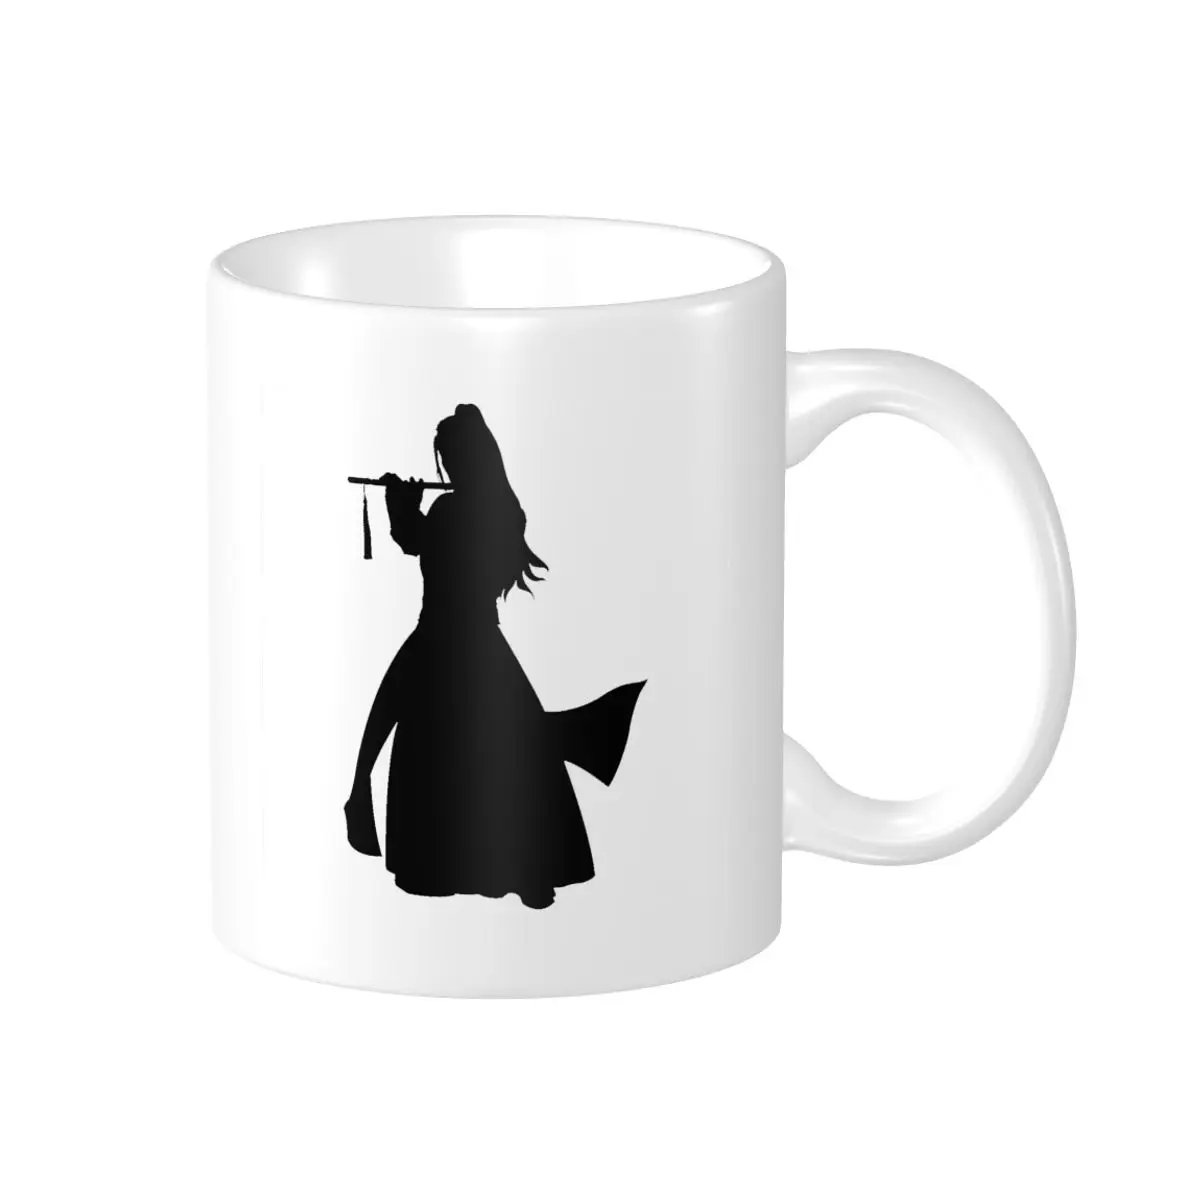 

Promo The Untamed Wei Wuxian The Untamed Mugs Top Quality Cups CUPS Print Humor Graphic R246 milk cups